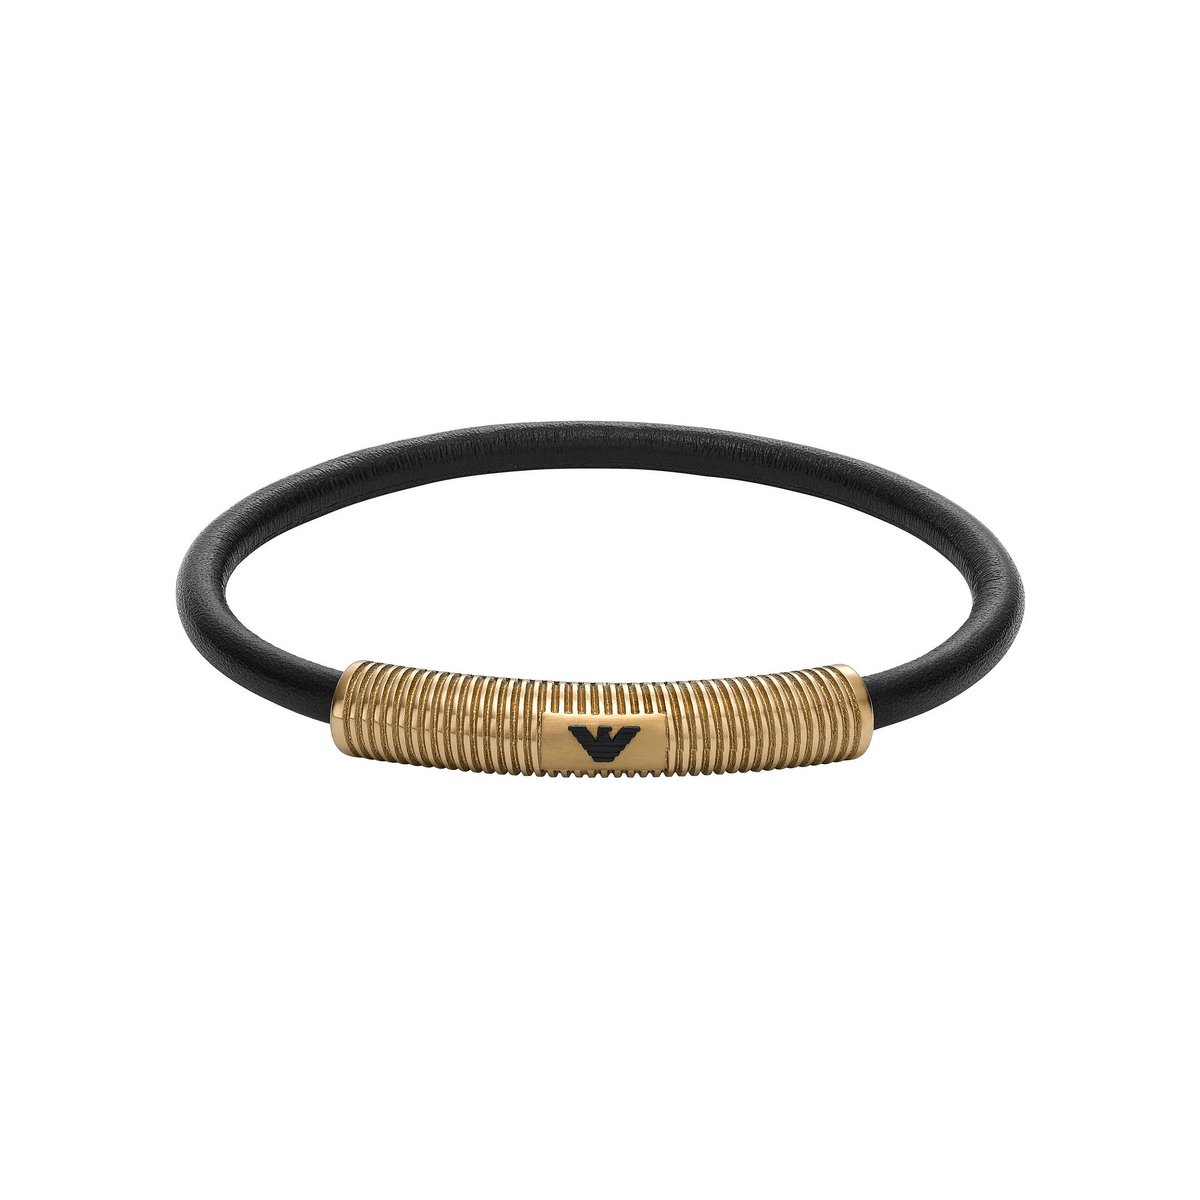 Emporio Armani Heren-Armband Leder, Staal One Size 88576136 | bol